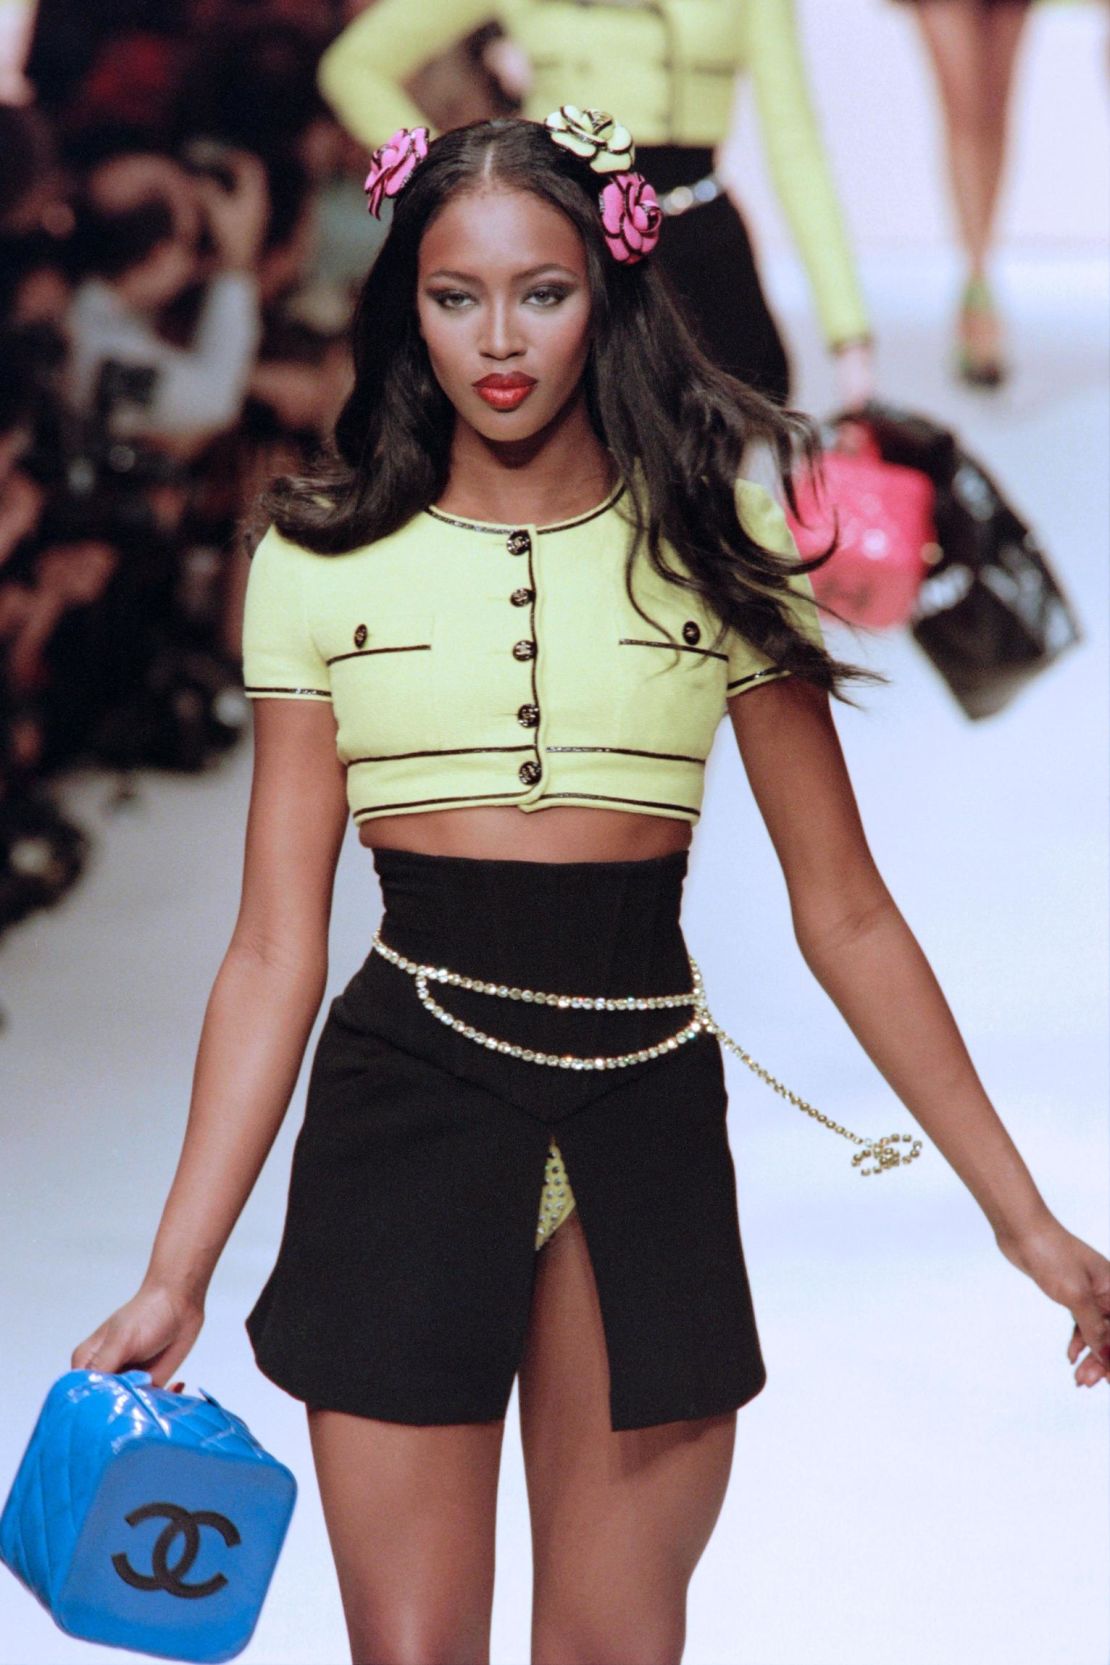 Naomi Campbell walking for Chanel in Paris on October 17, 1994.